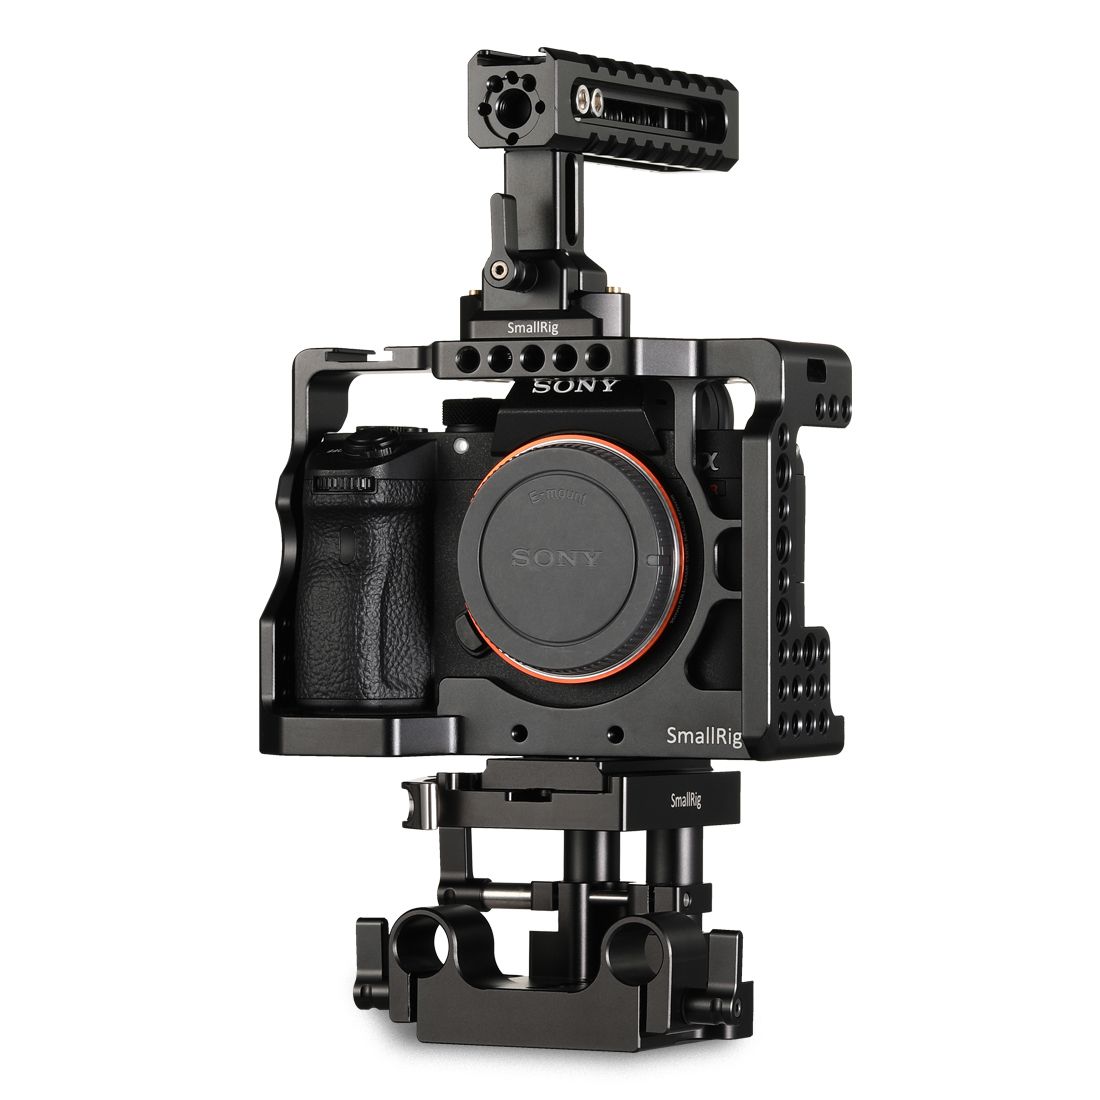 SmallRig-9990-A73-A7R3-Camera-Cage-Kit-for-Sony-A7RIII-A7III-Camera-Cage-with-Nat0-Handle-Arm-Kit-fo-1726732